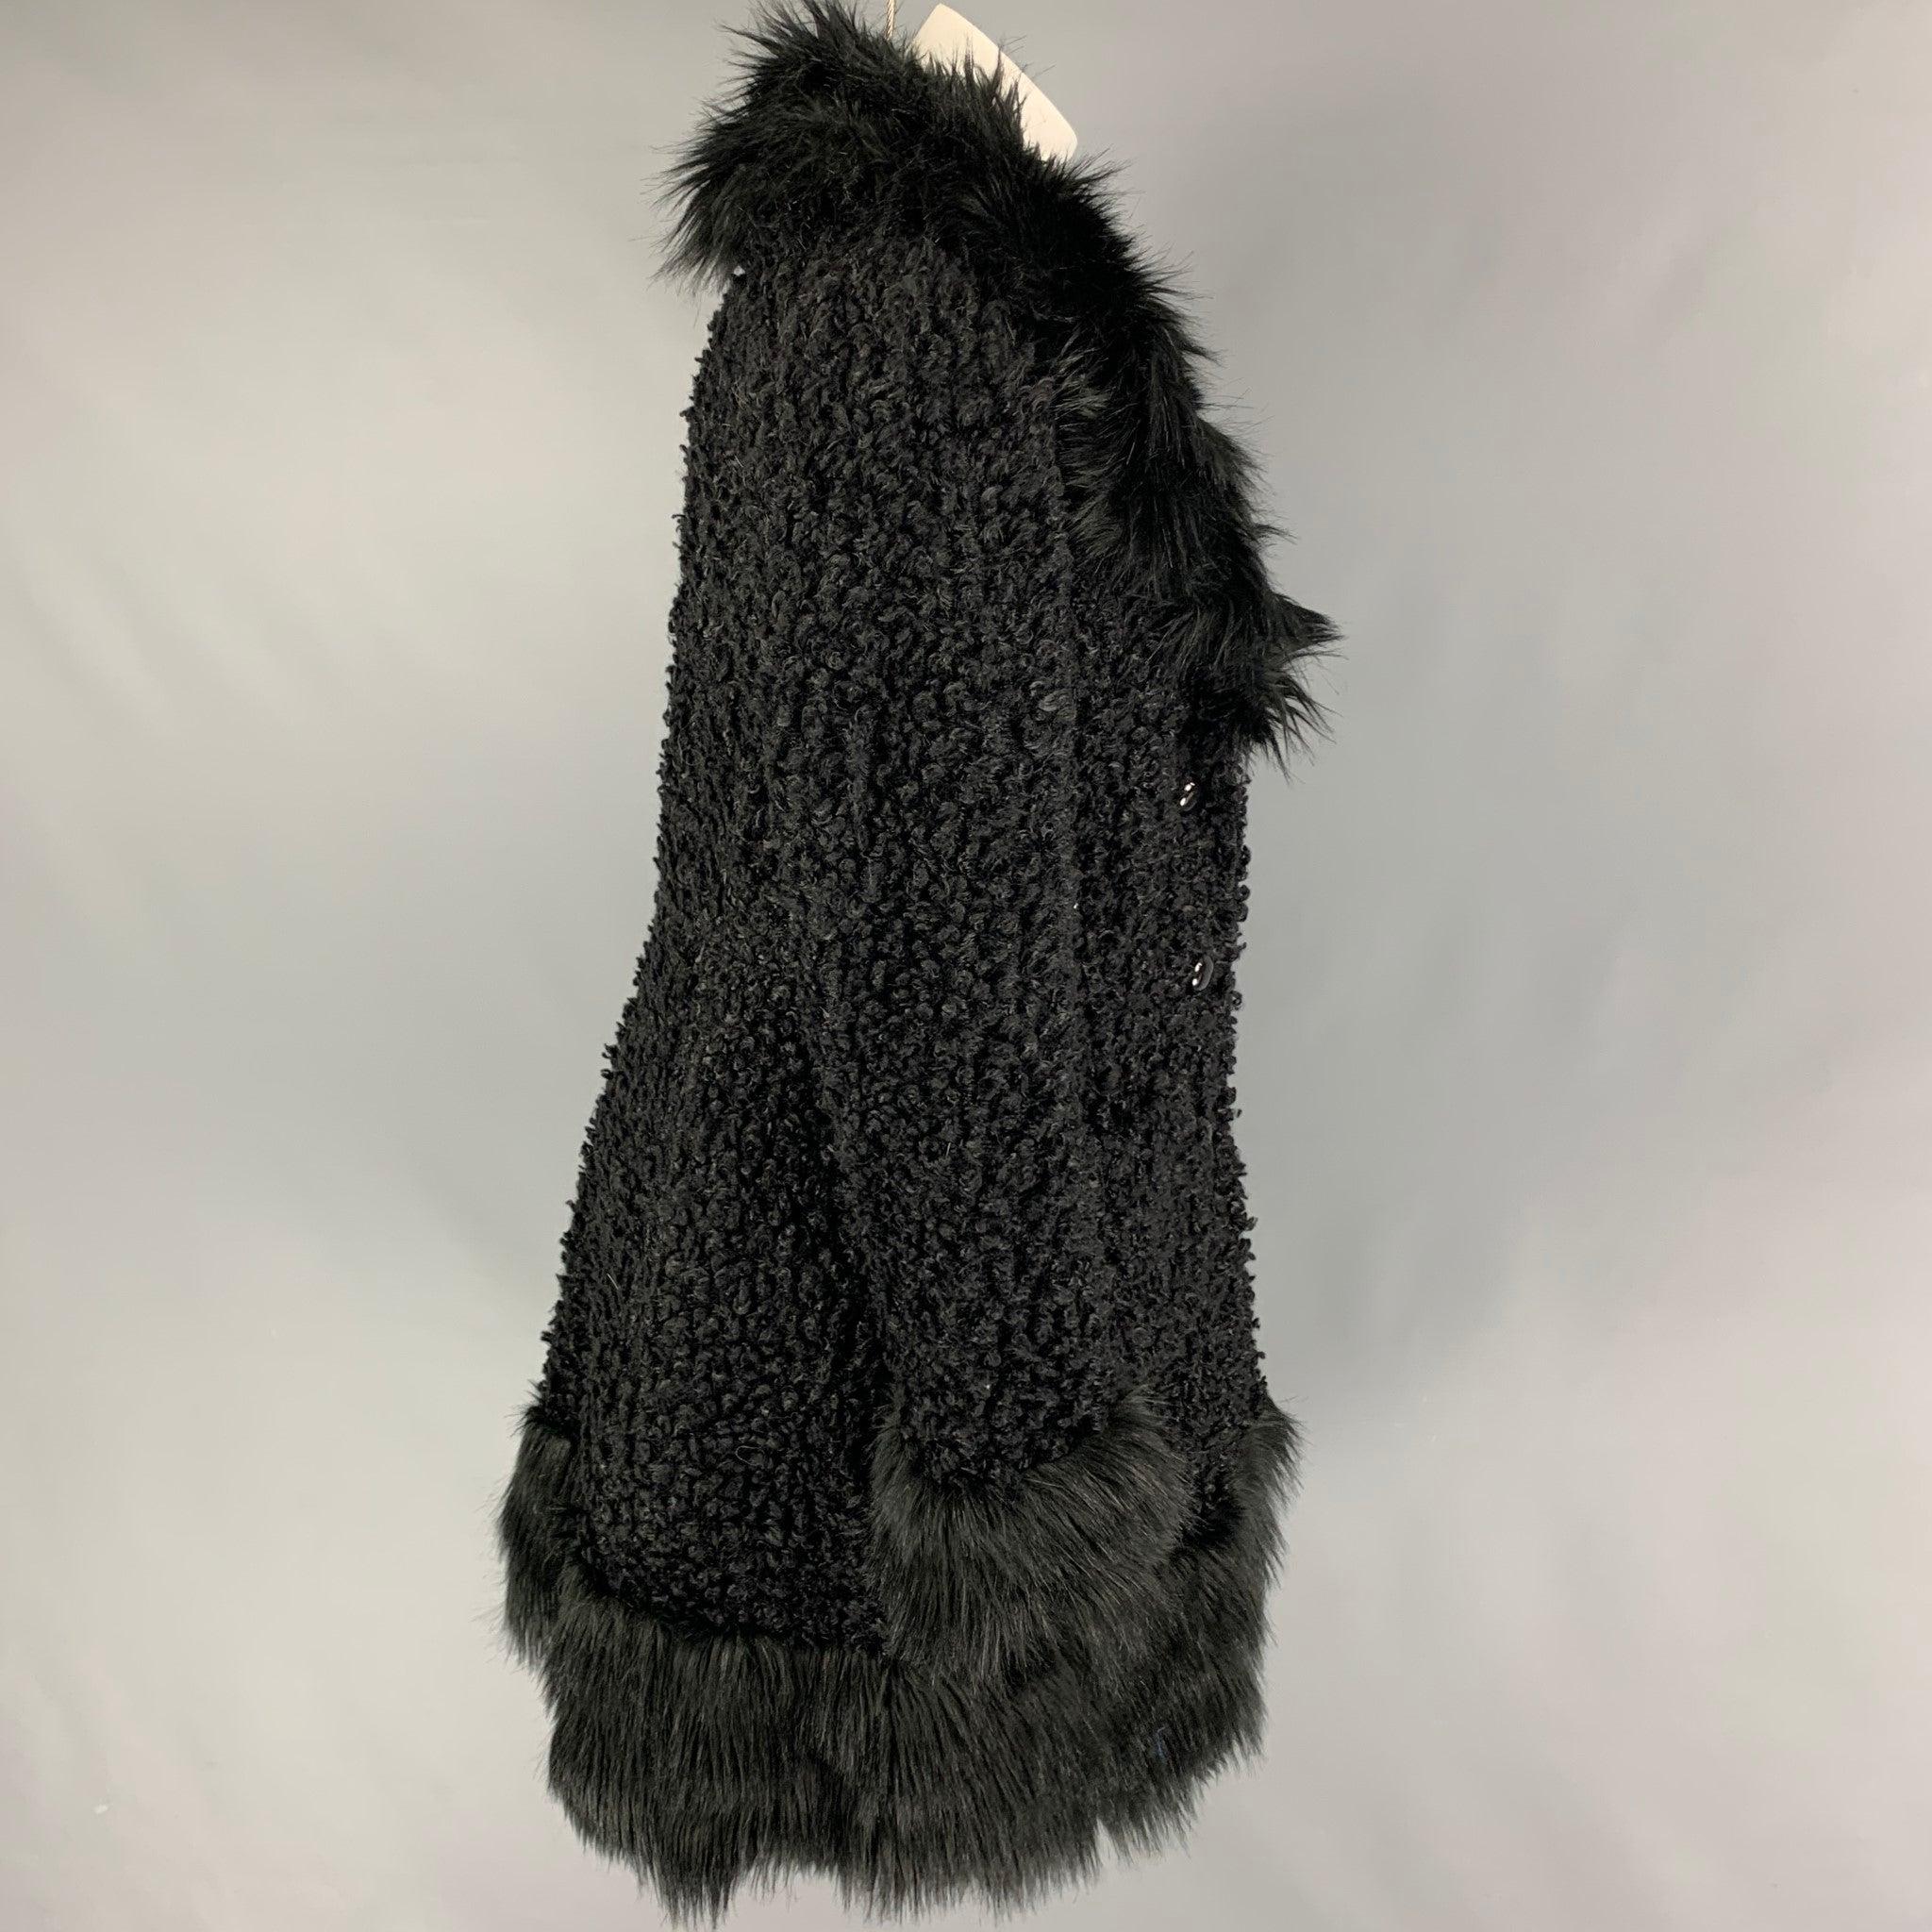 ANNA SUI coat comes in a black textured faux fur featuring a large collar design, patch pockets, and a buttoned closure. Made in USA.
Very Good
Pre-Owned Condition. 

Marked:   M 

Measurements: 
 
Shoulder: 16 inches  Bust: 40 inches  Sleeve: 25